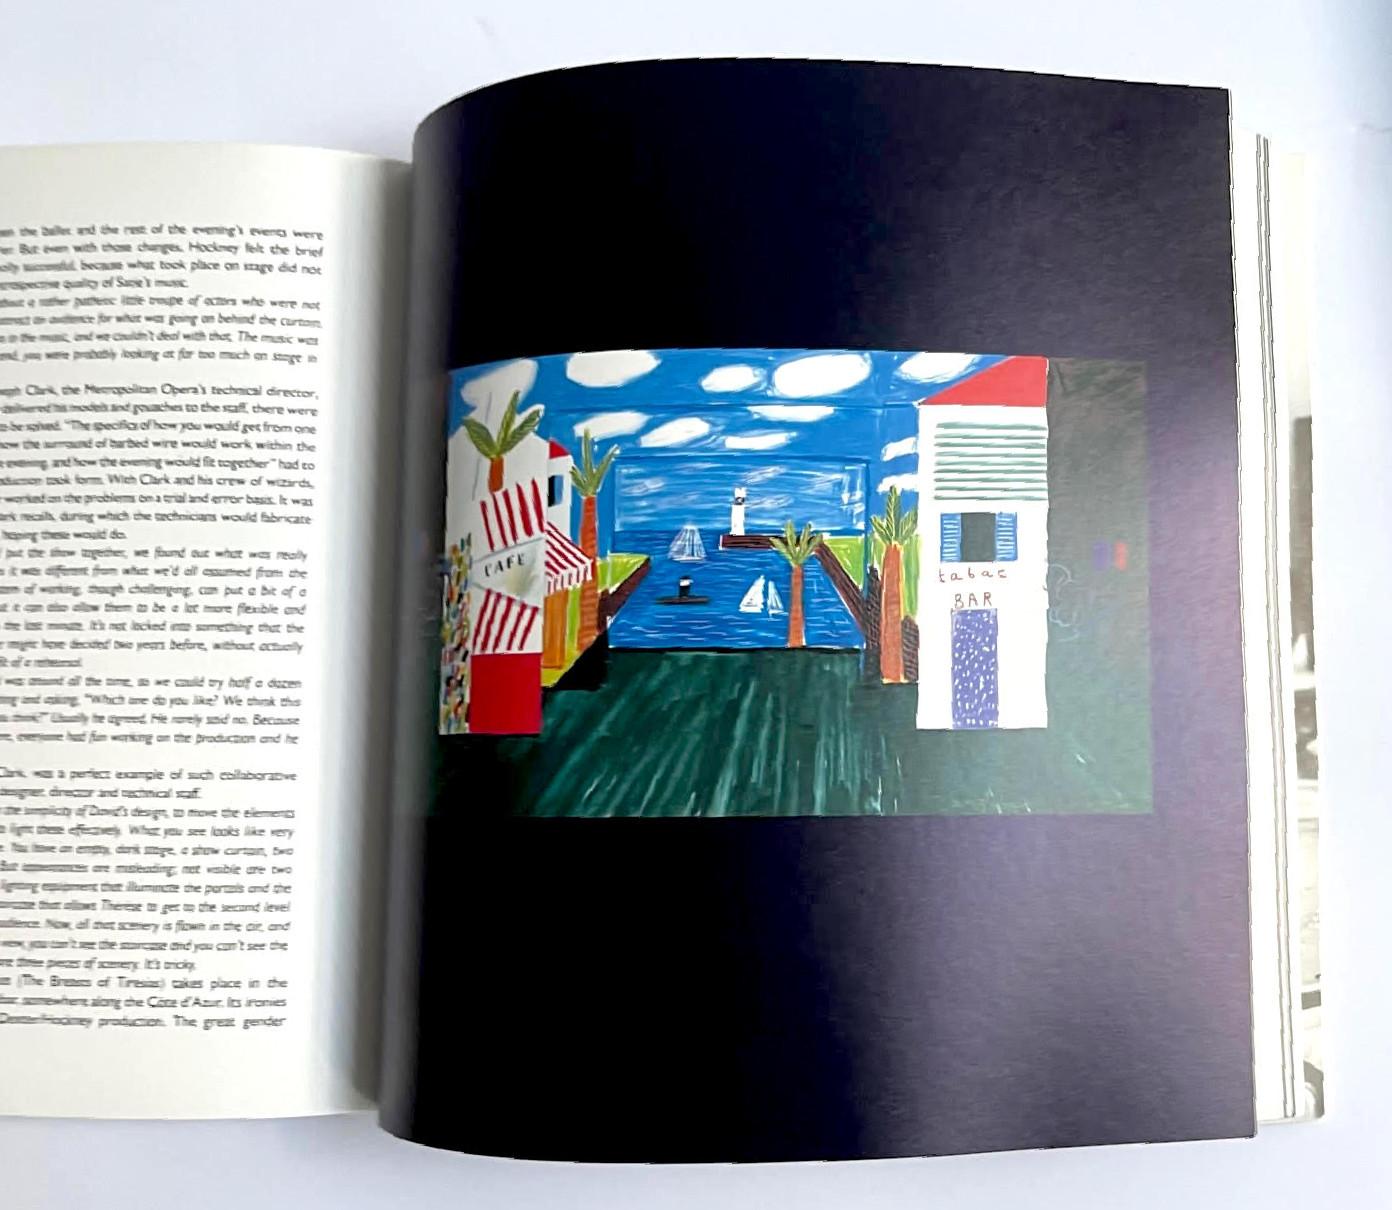 Hockney Paints the Stage (Hand signed and inscribed with doodle of French flag) For Sale 4